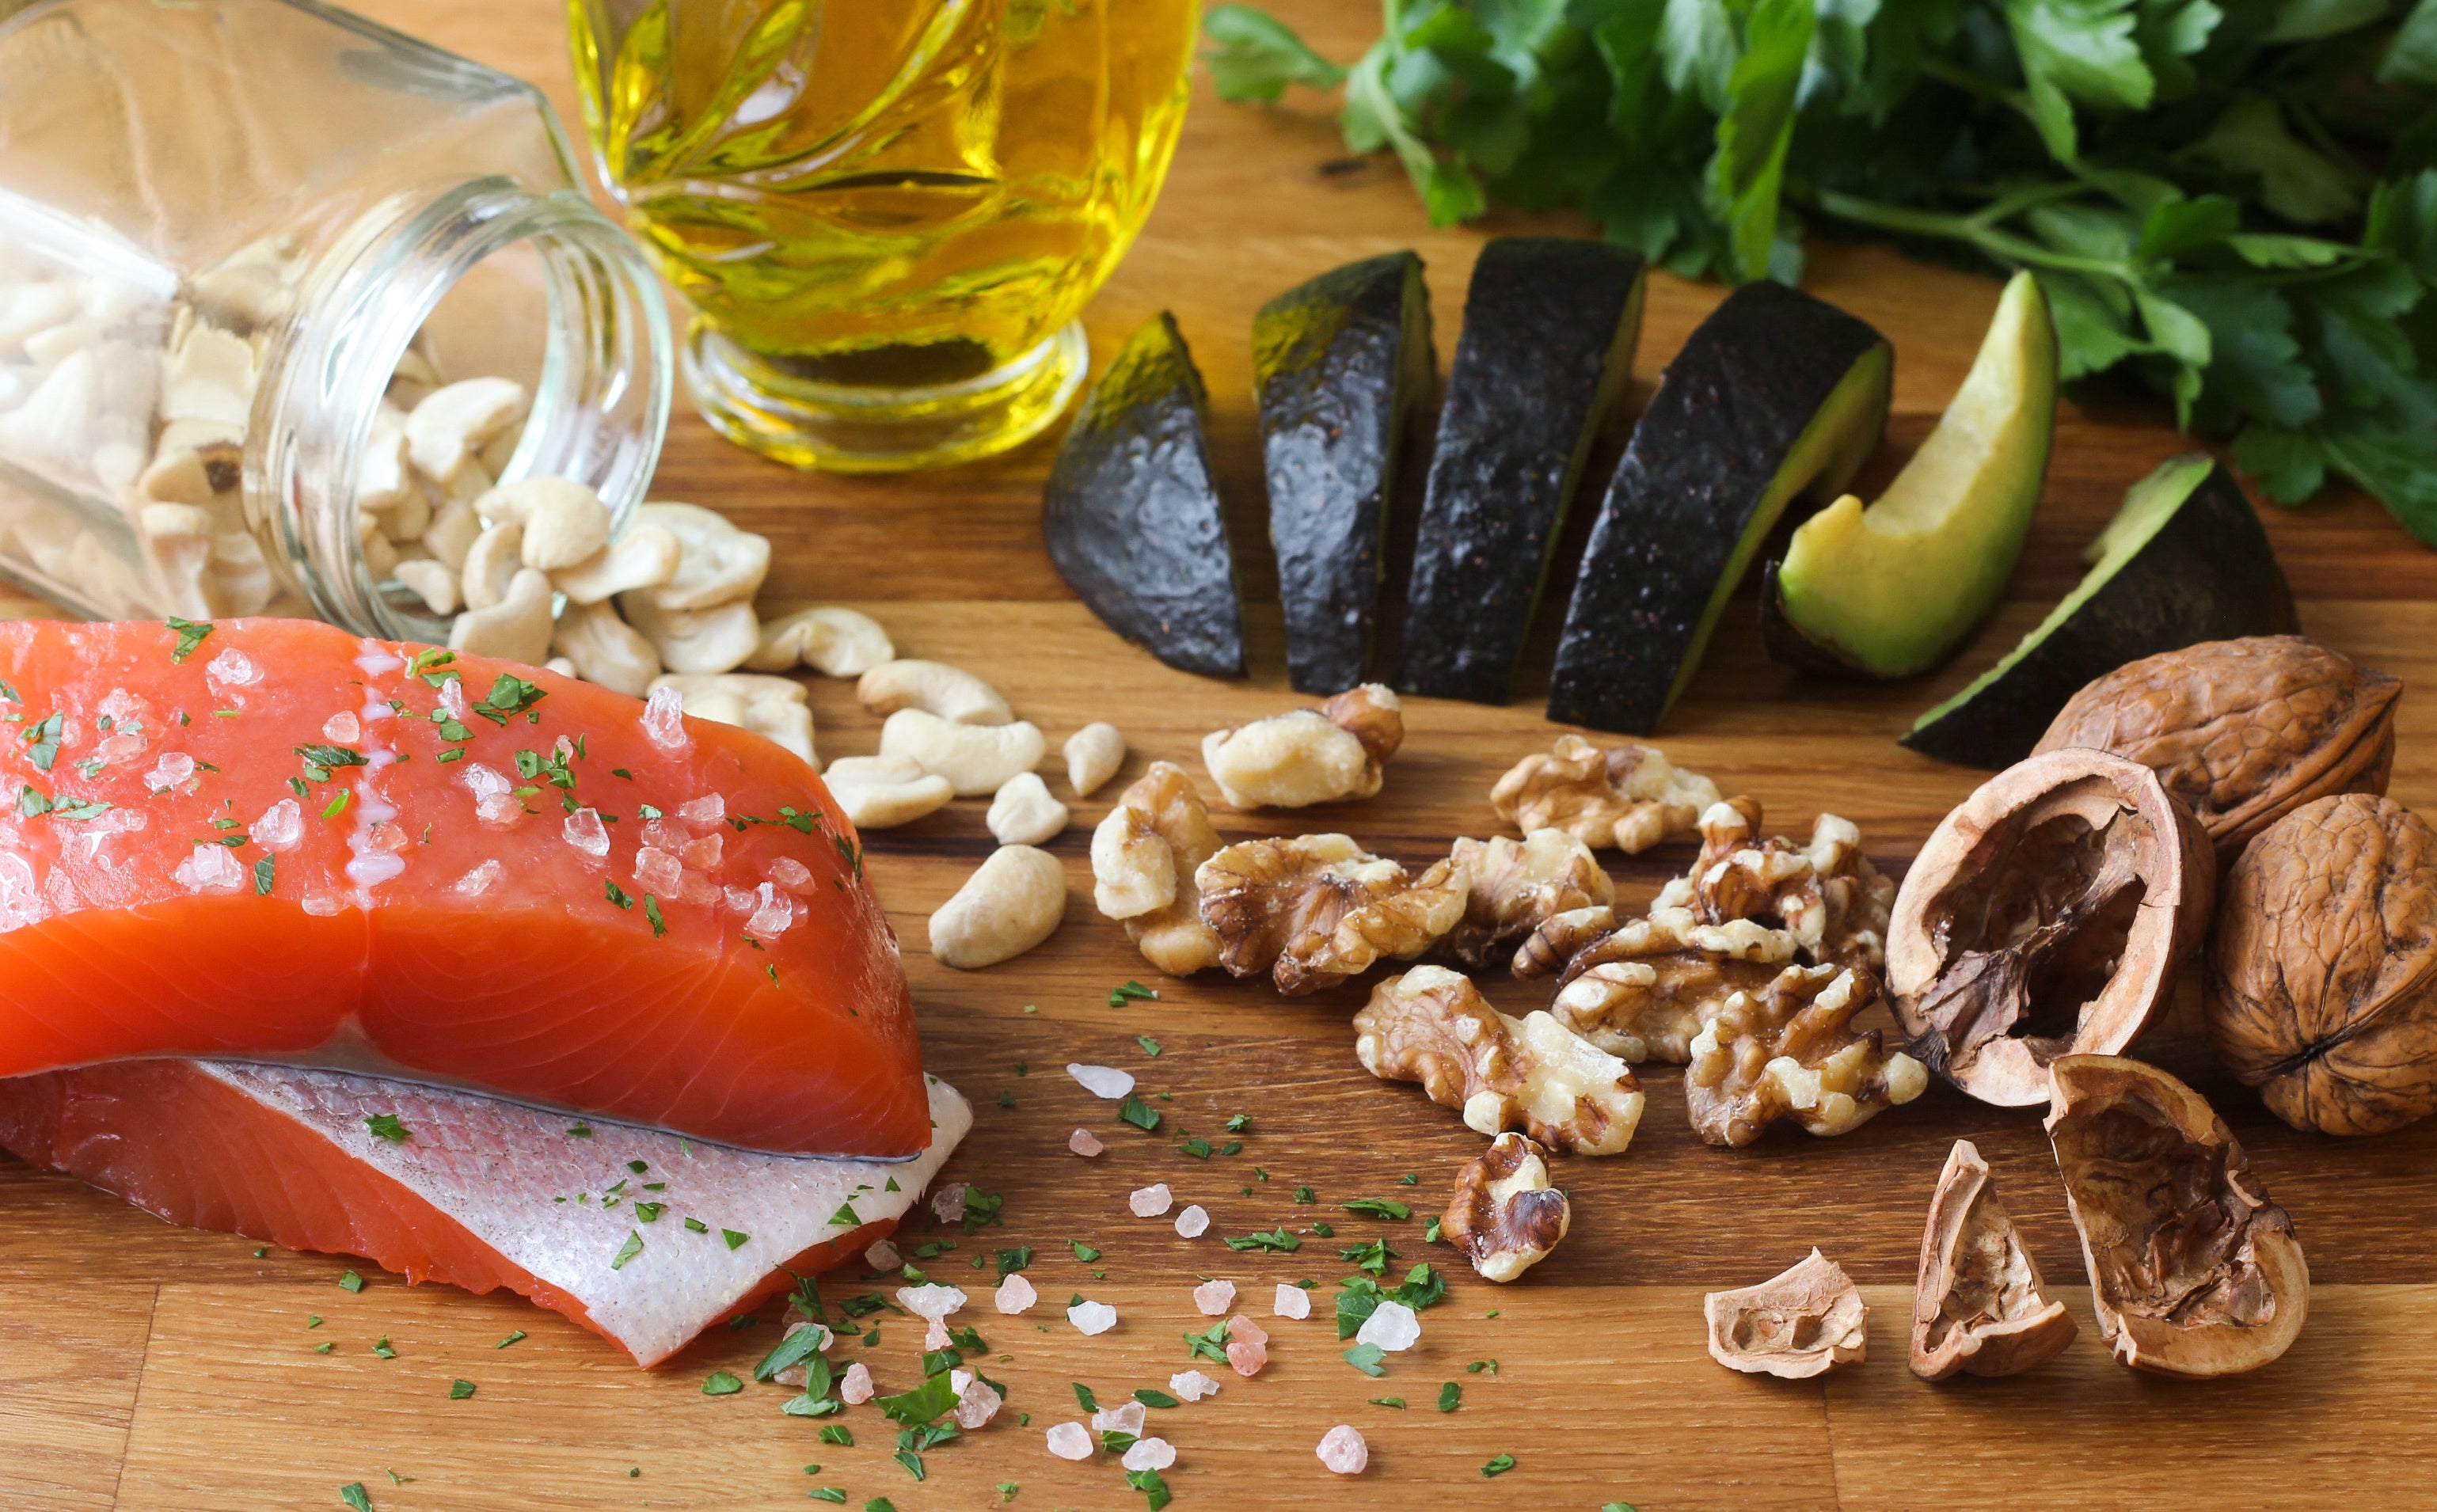 Some foods with omega-3 fats